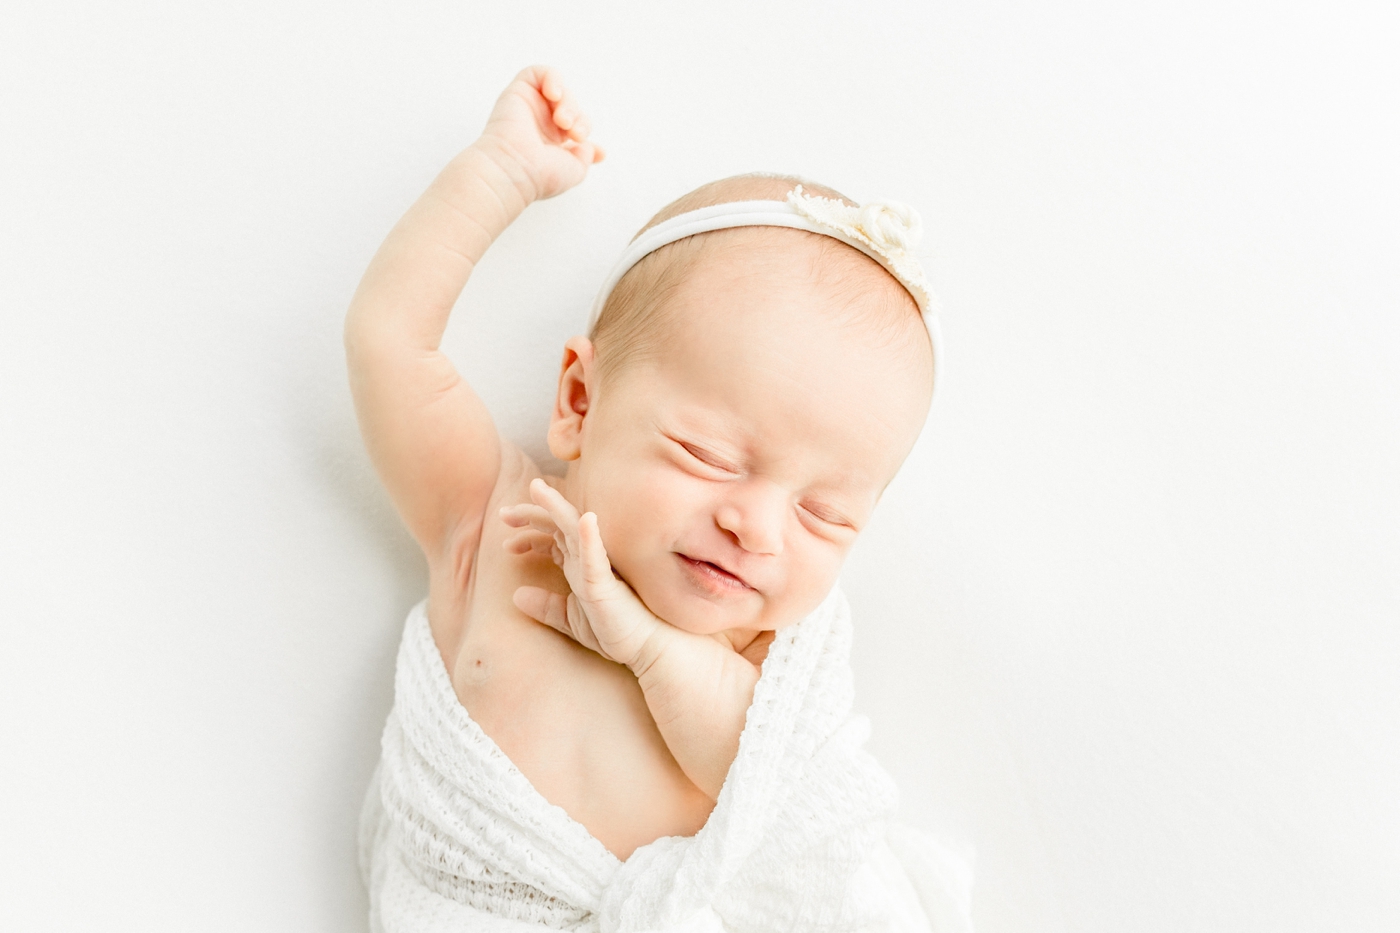 Baby stretching during newborn session in studio with Sana Ahmed Photography.